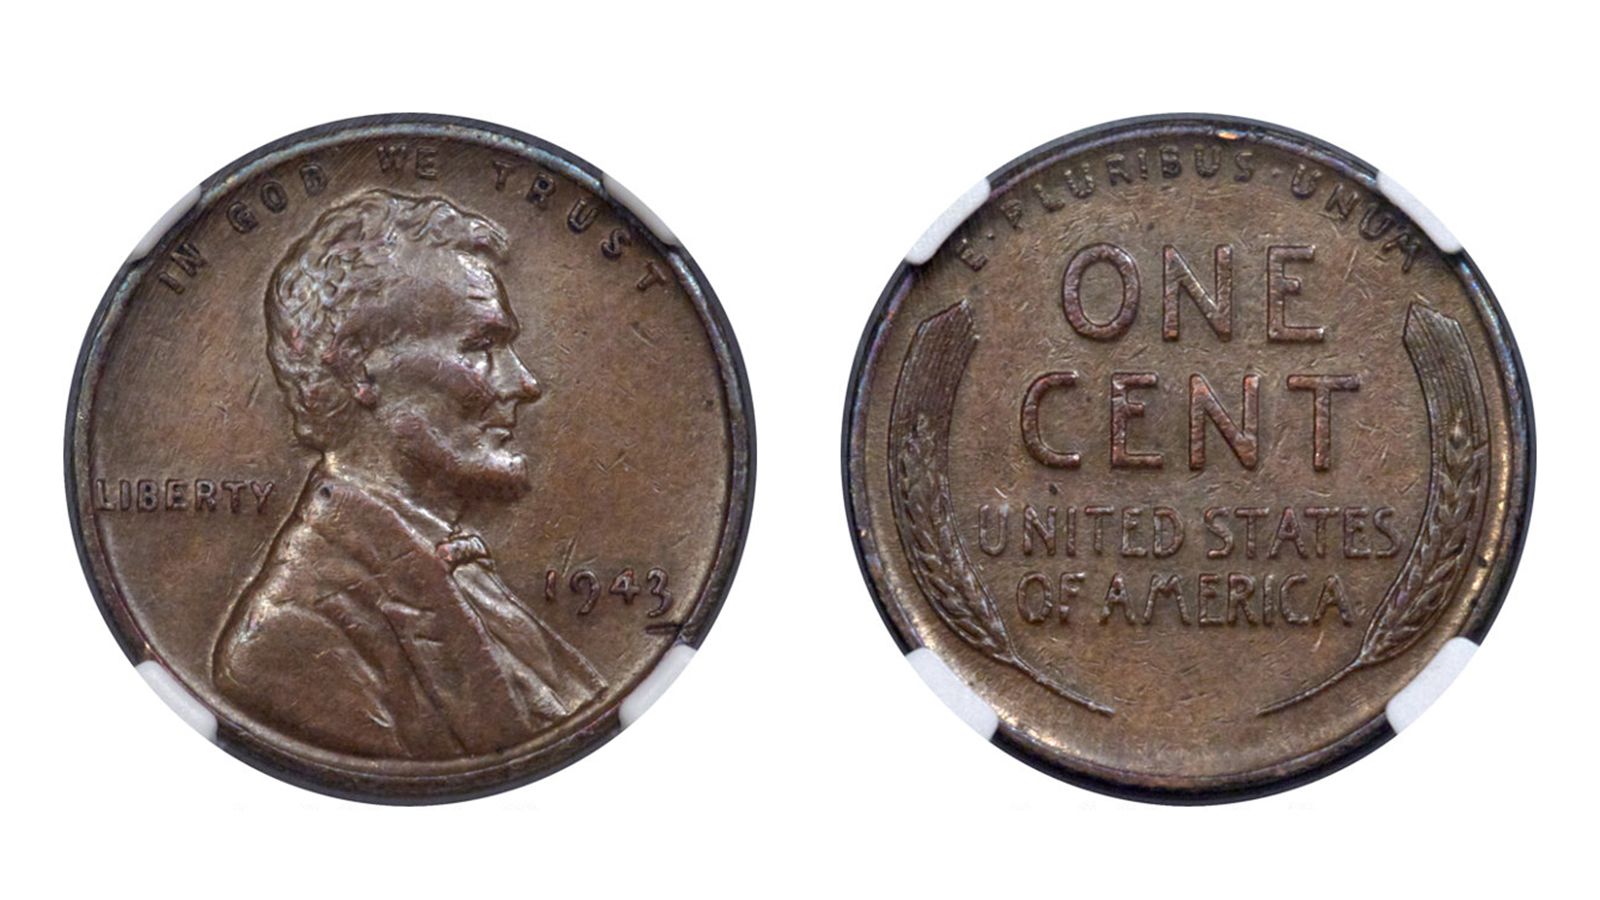 The Rare 1943 Copper Penny (& Why It's Worth So Much)